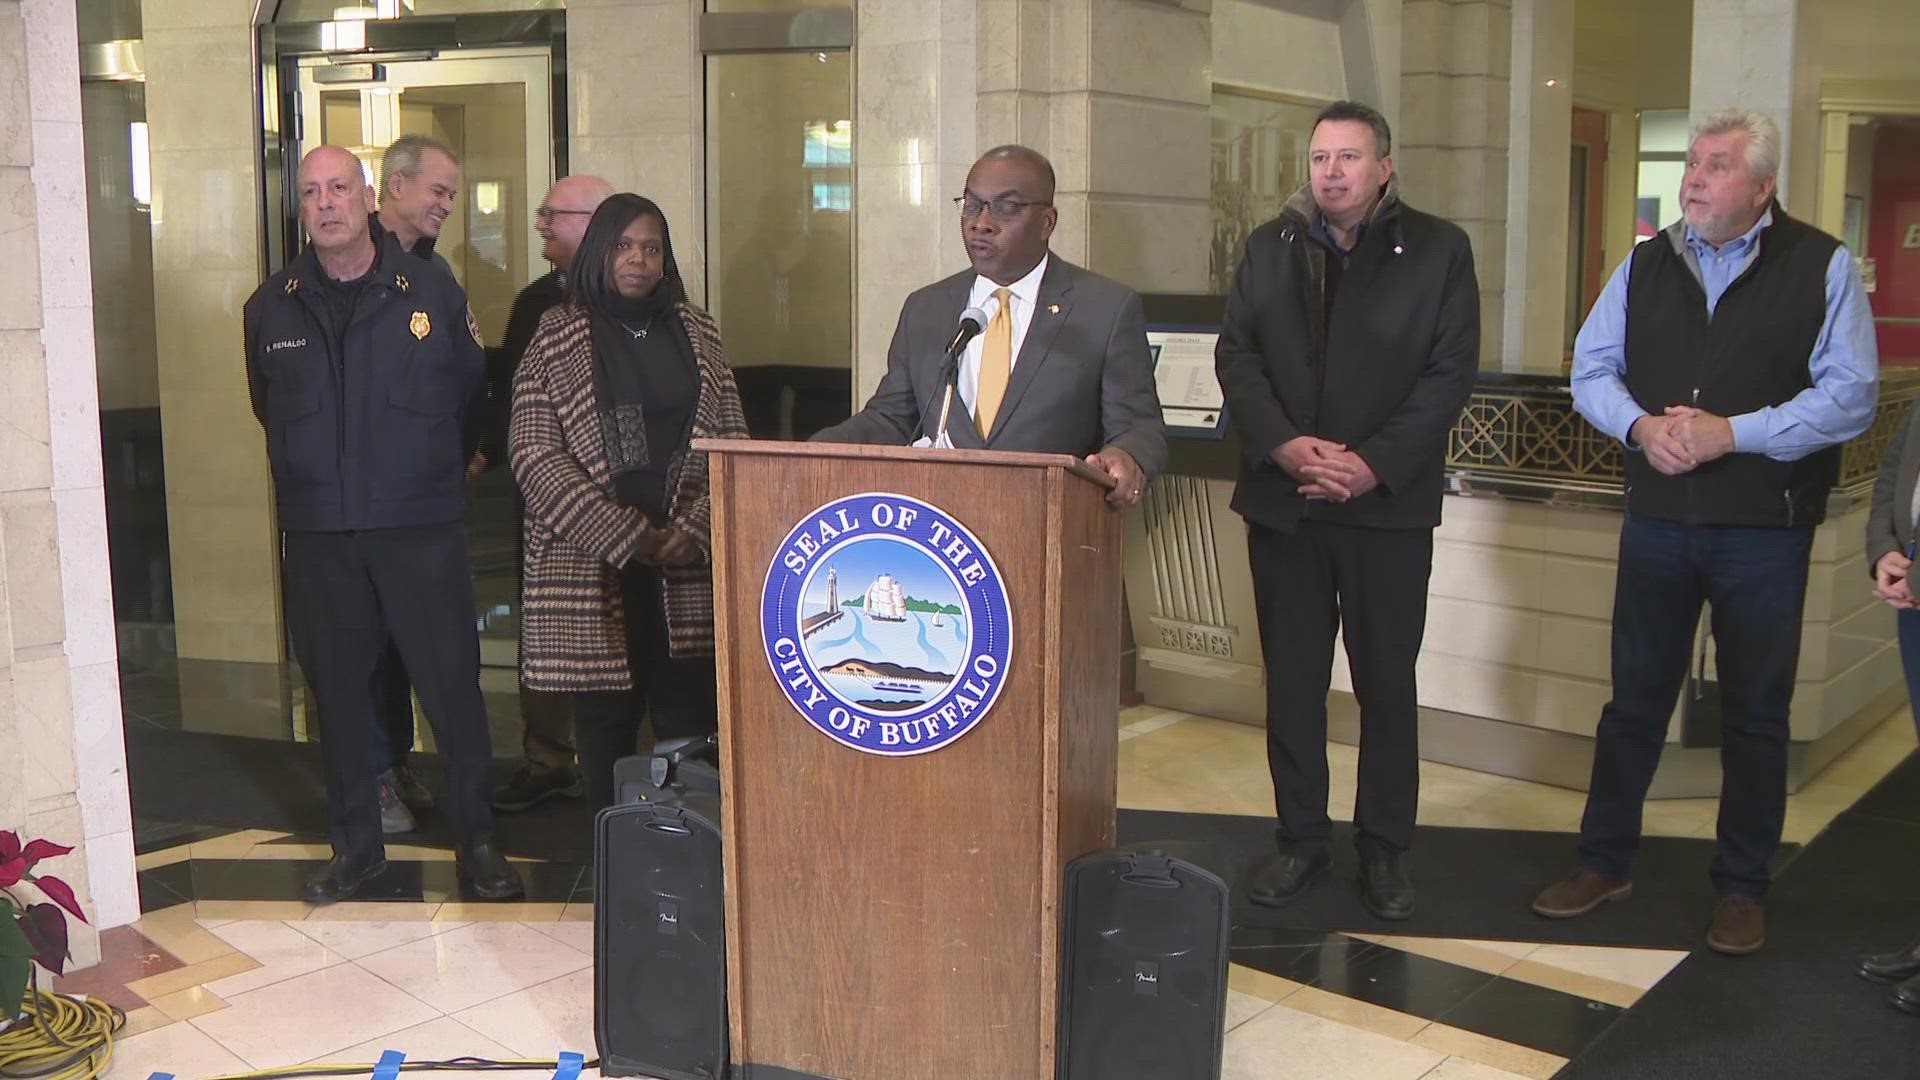 Mayor Byron Brown and the City of Buffalo held a news conference on Friday, Dec. 30, 2022, ahead of the New Year's Eve ball drop.